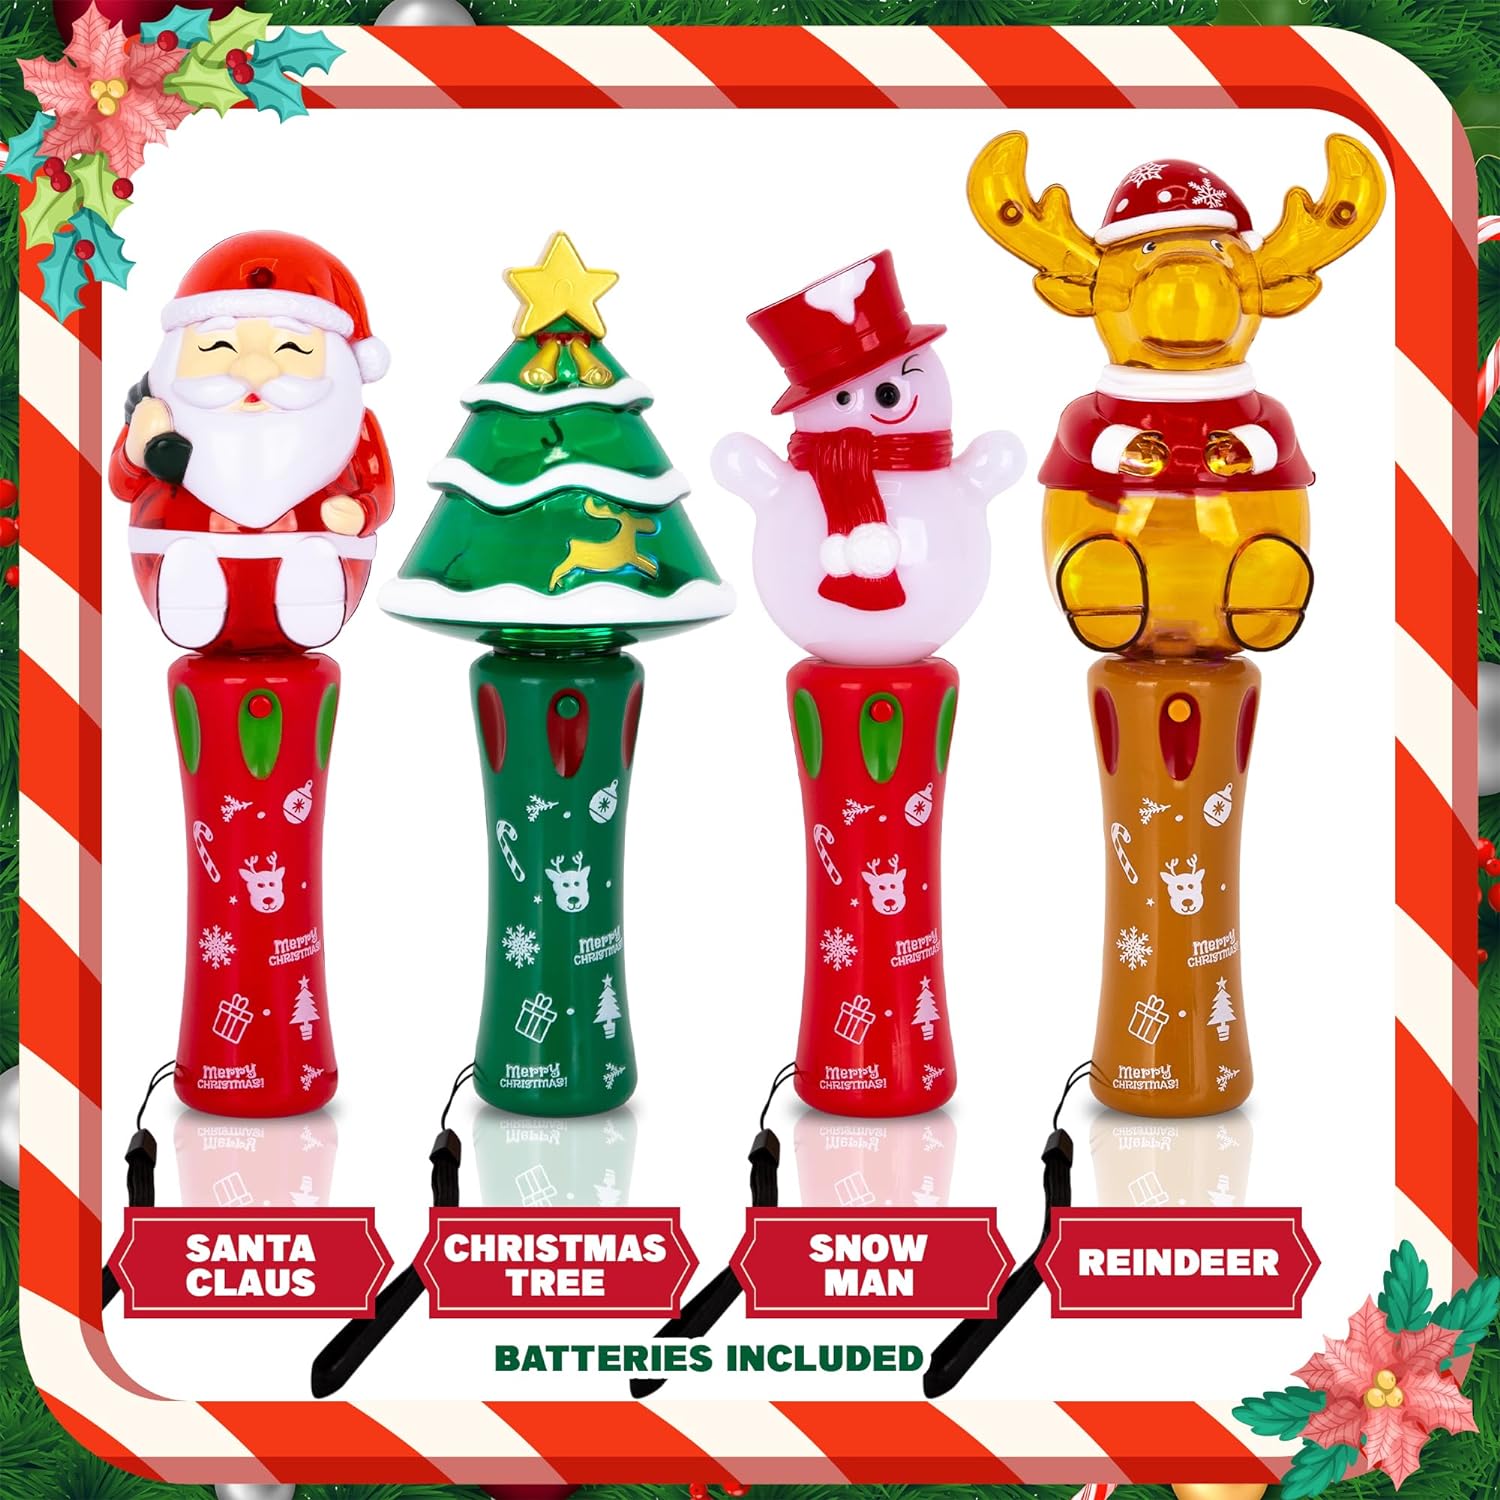 Light Up Christmas Spinner Wands - Set of 4- Spinning Christmas Wands for Kids with Multicolored LEDs - 4 Festive Designs